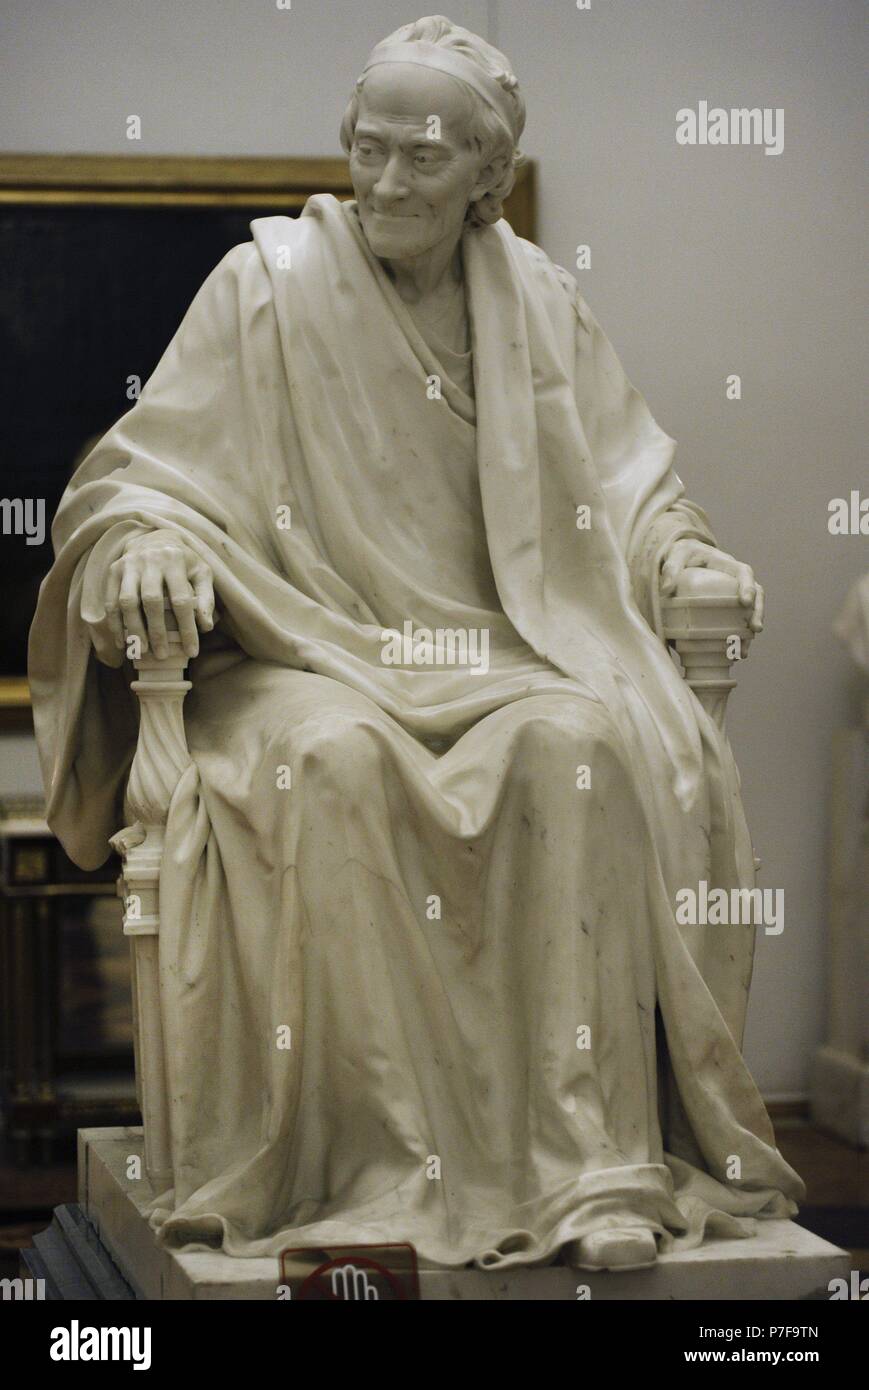 Voltaire, Francois-Marie Arouet, called (1694-1778). French writer. Sculpture by Jean-Antoine Houdon (1741-1828), 1781. The State Hermitage Museum. Saint Petersburg. Russia. Stock Photo